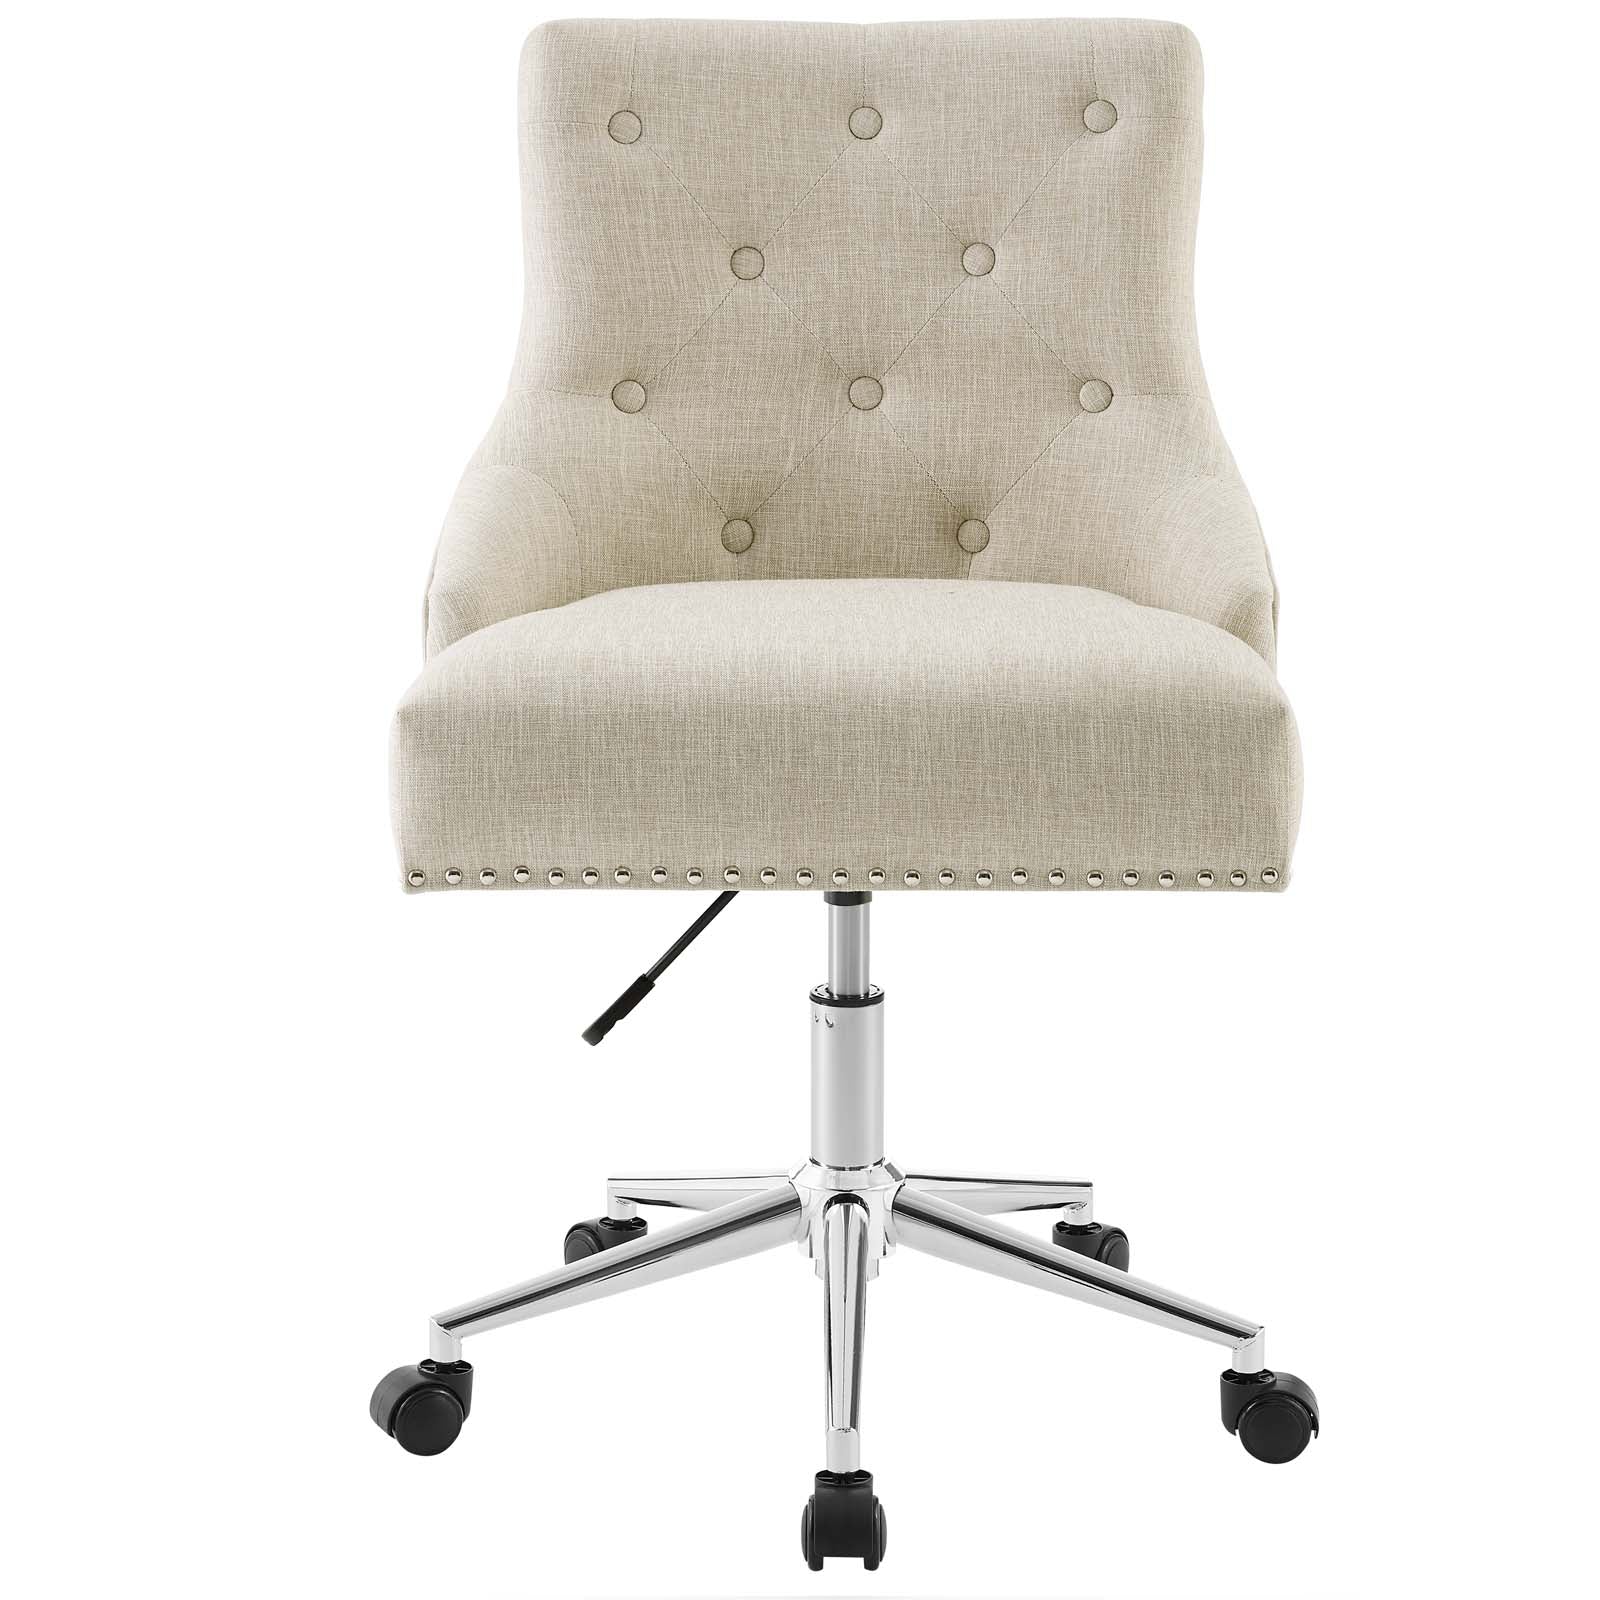 Modway Task Chairs - Regent Tufted Button Swivel Upholstered Fabric Office Chair Beige